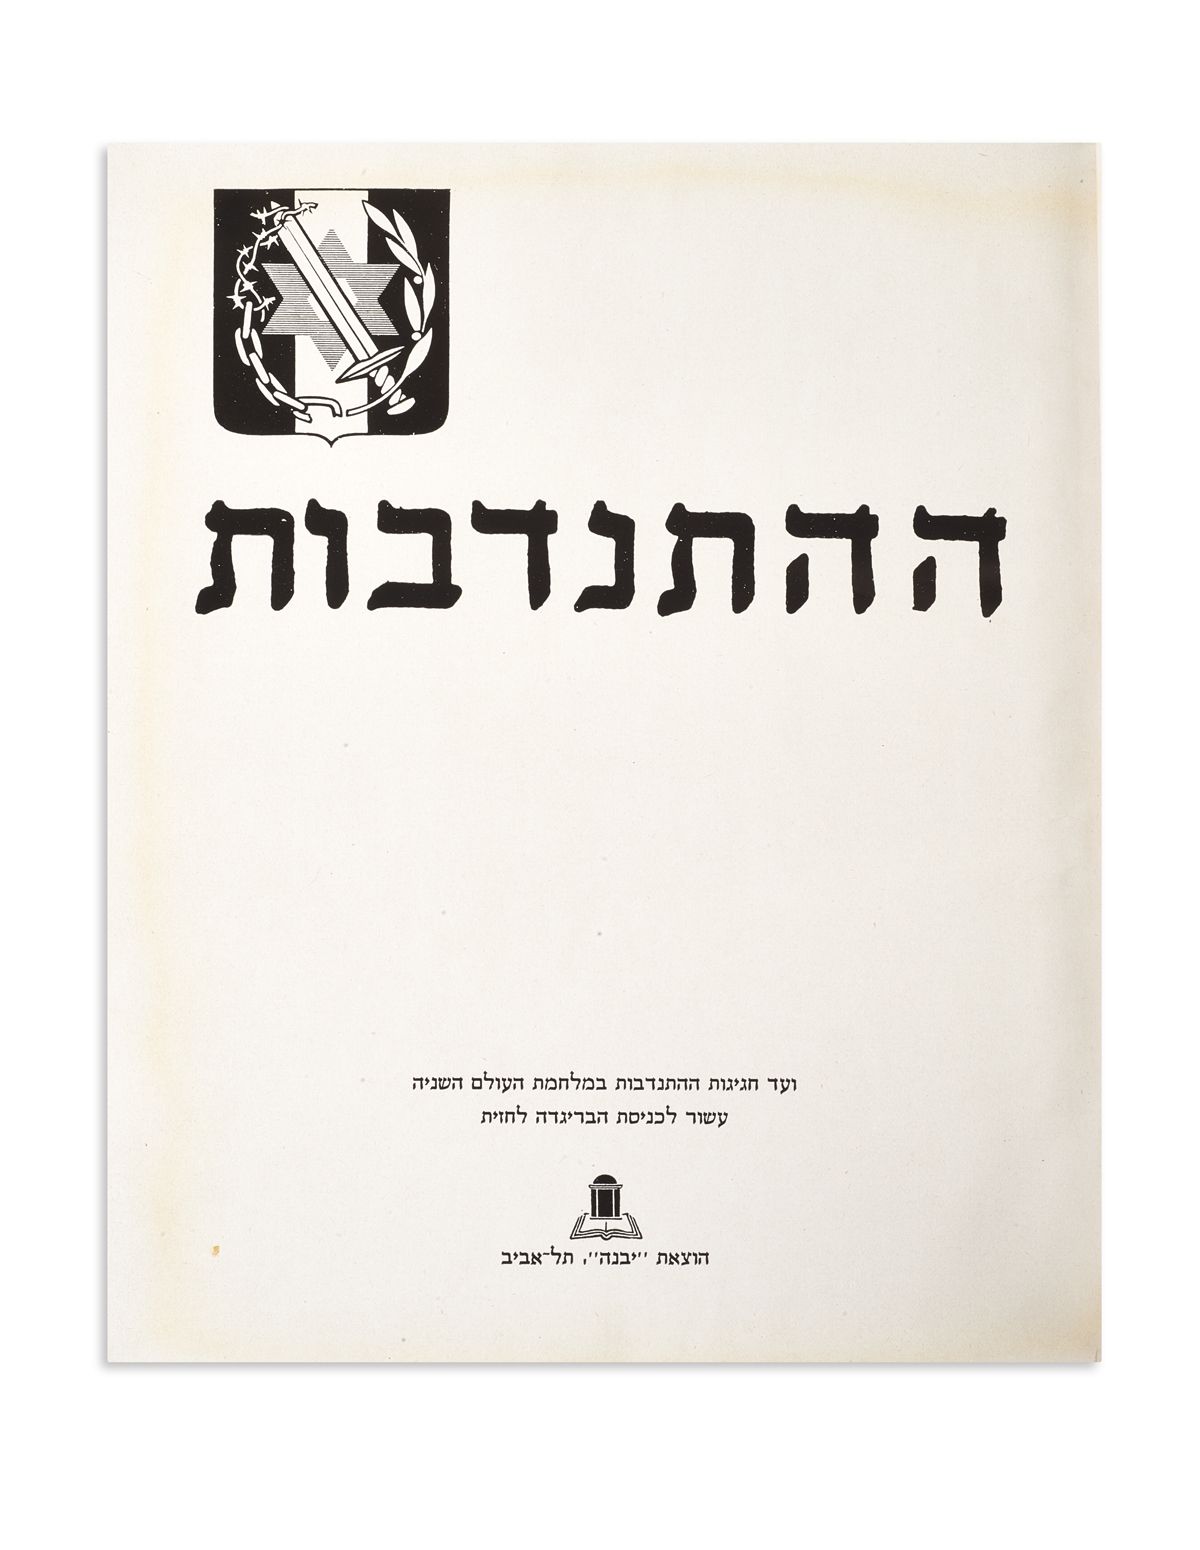 HaHitnavdut. Committee for the Celebration of… A Decade since the Appearance of the (Jewish) Brigade at the Front.